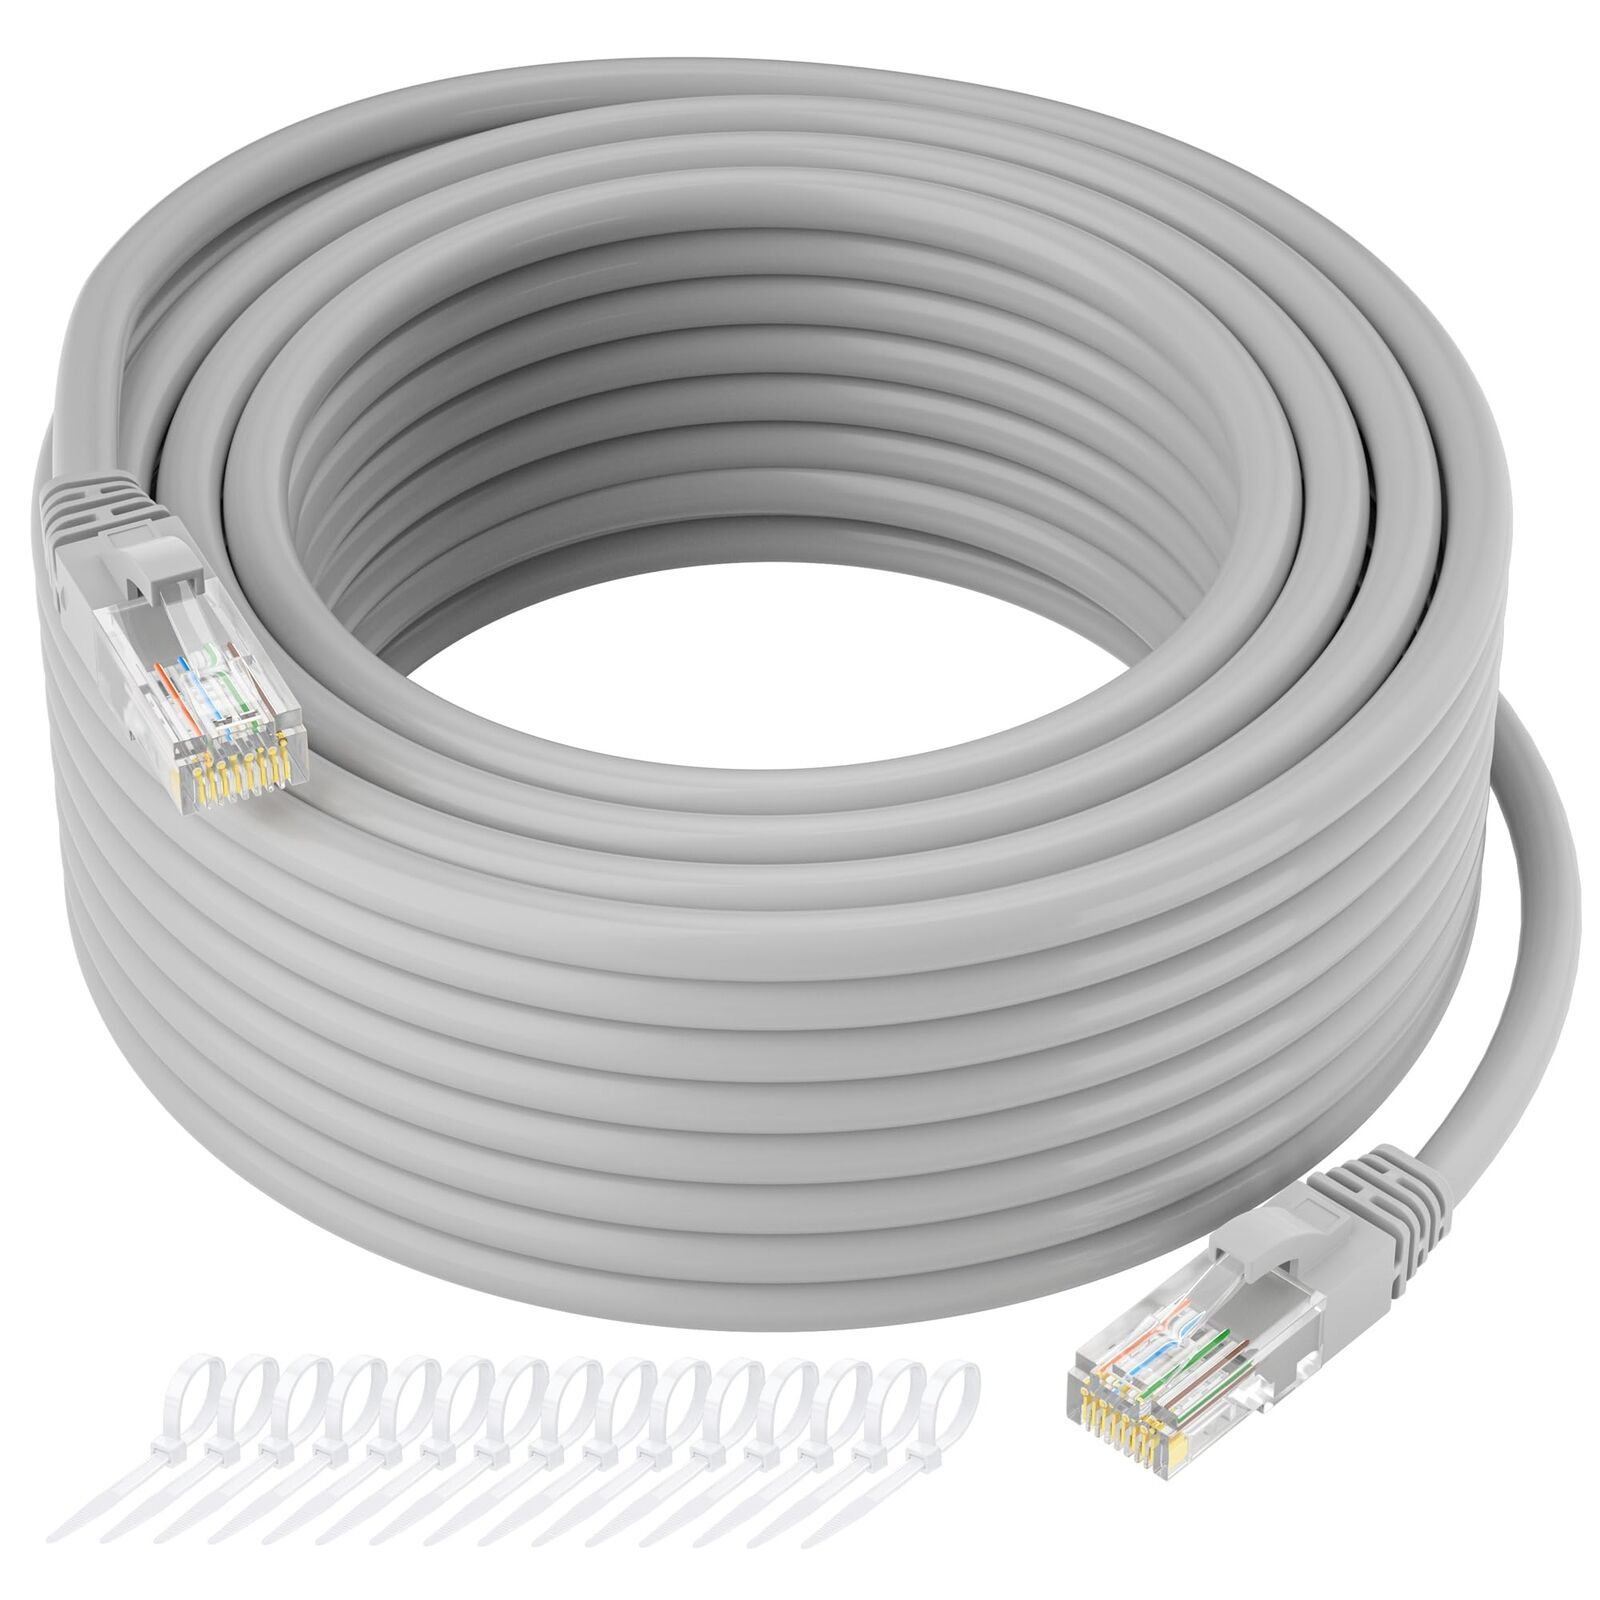 Ethernet LAN Cable 50 FT, Long Cat 5e Internet Cable, Grey Snagless Patch Cord,